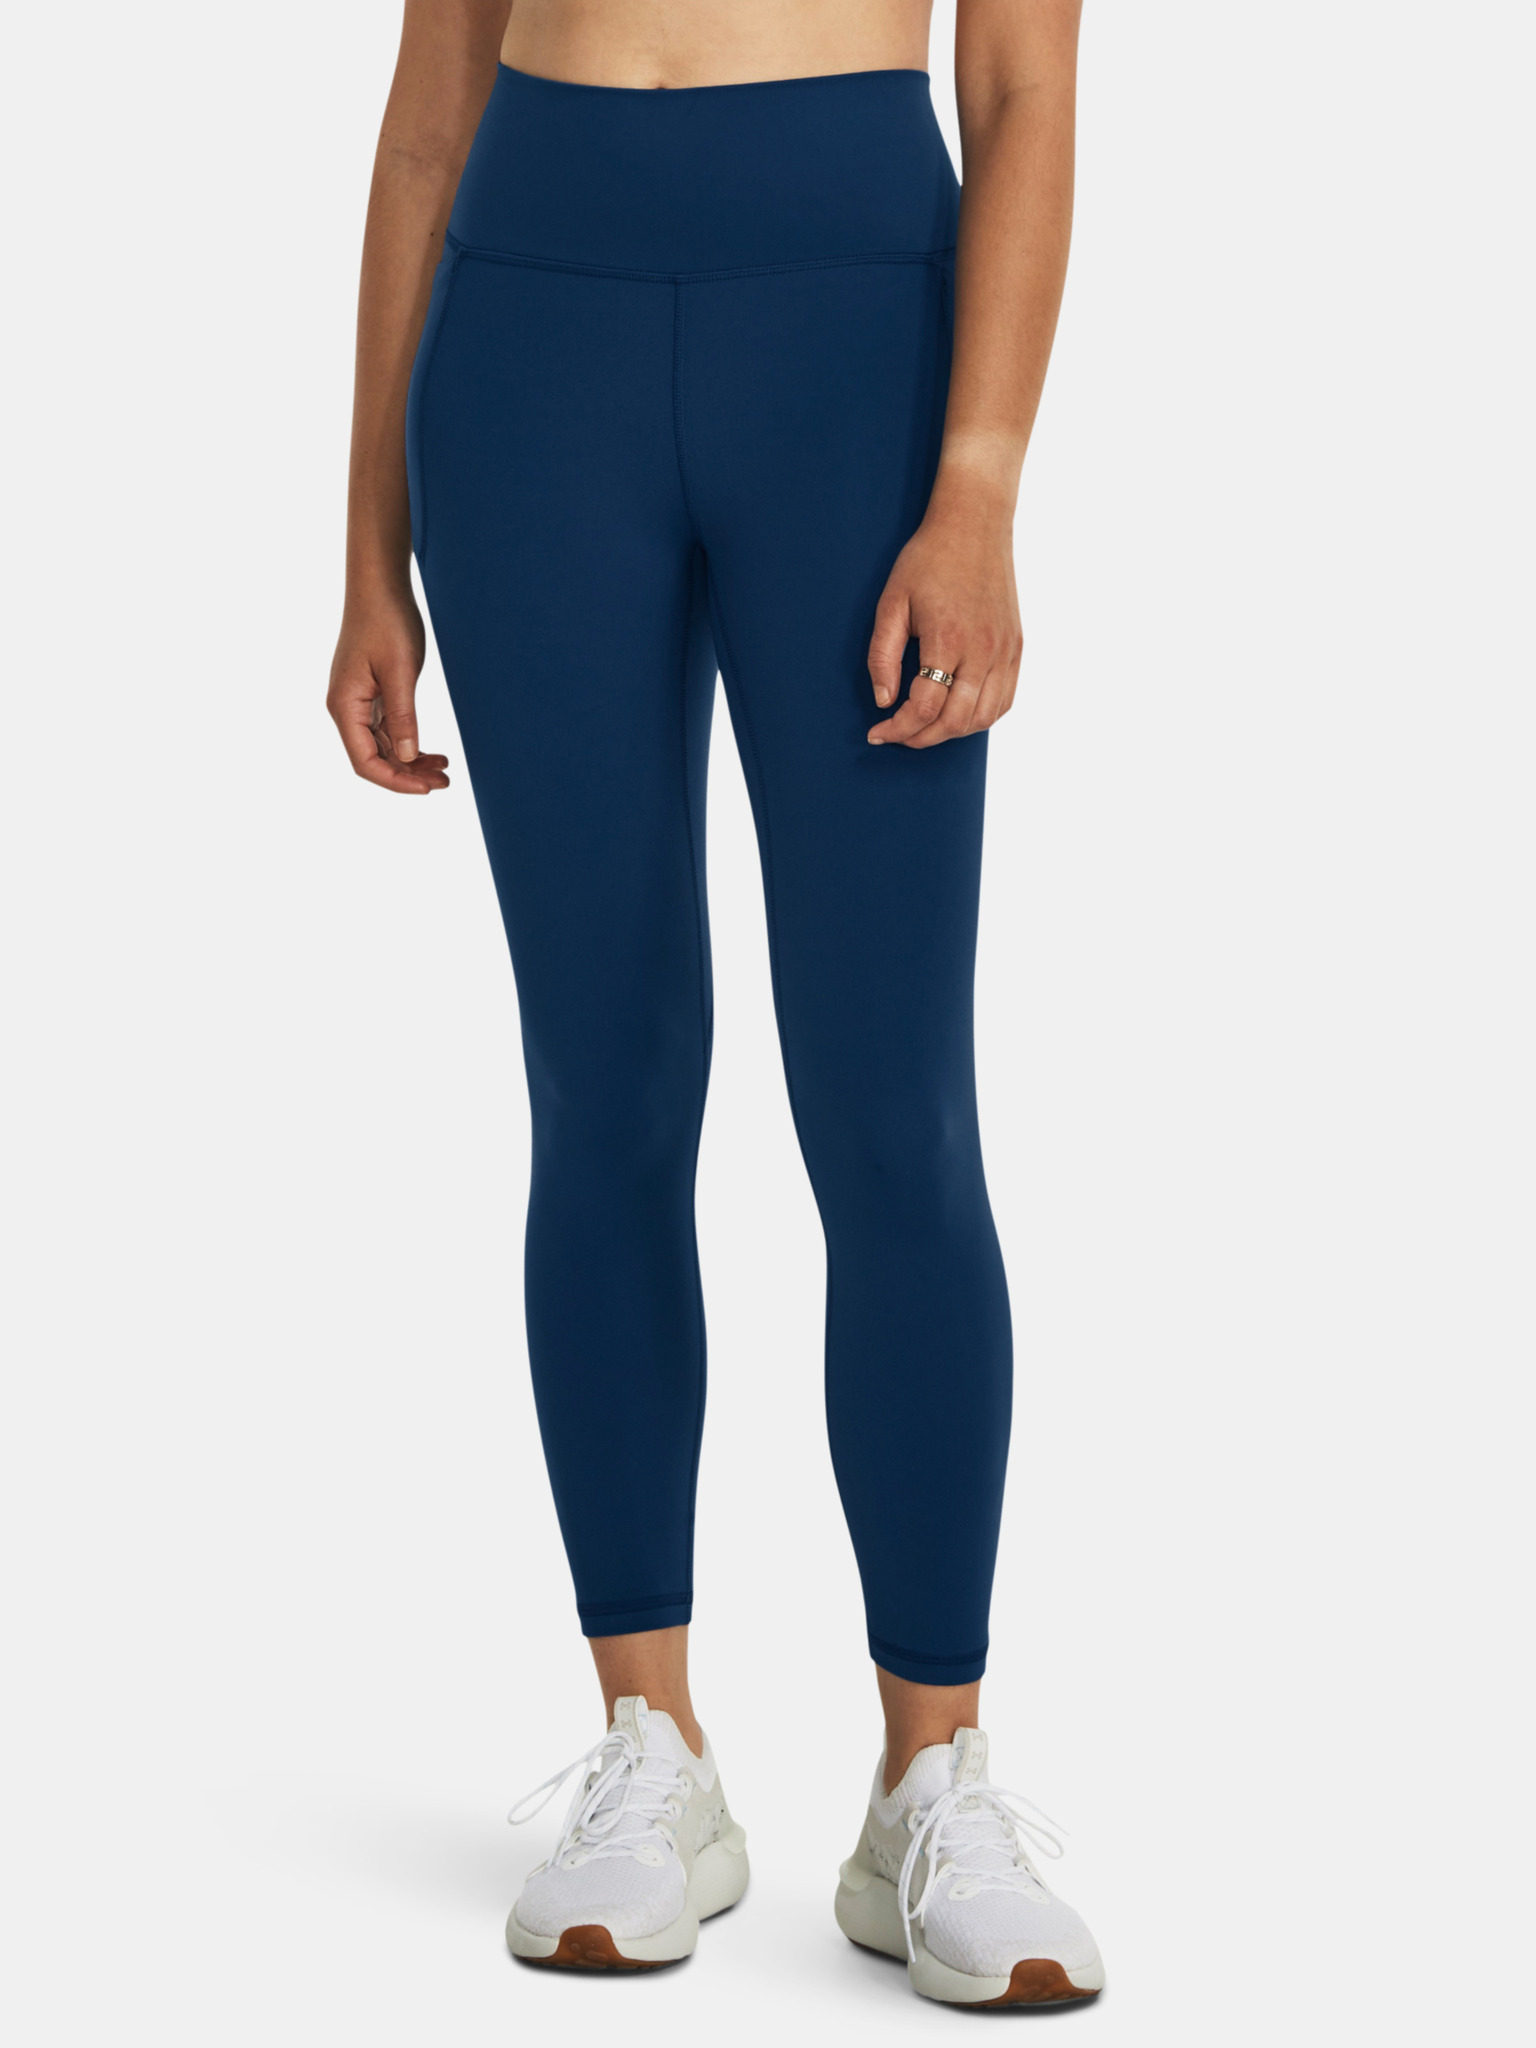 New UNDER ARMOUR Blue Ankle Crop High-Rise Compression Leggings Size Small